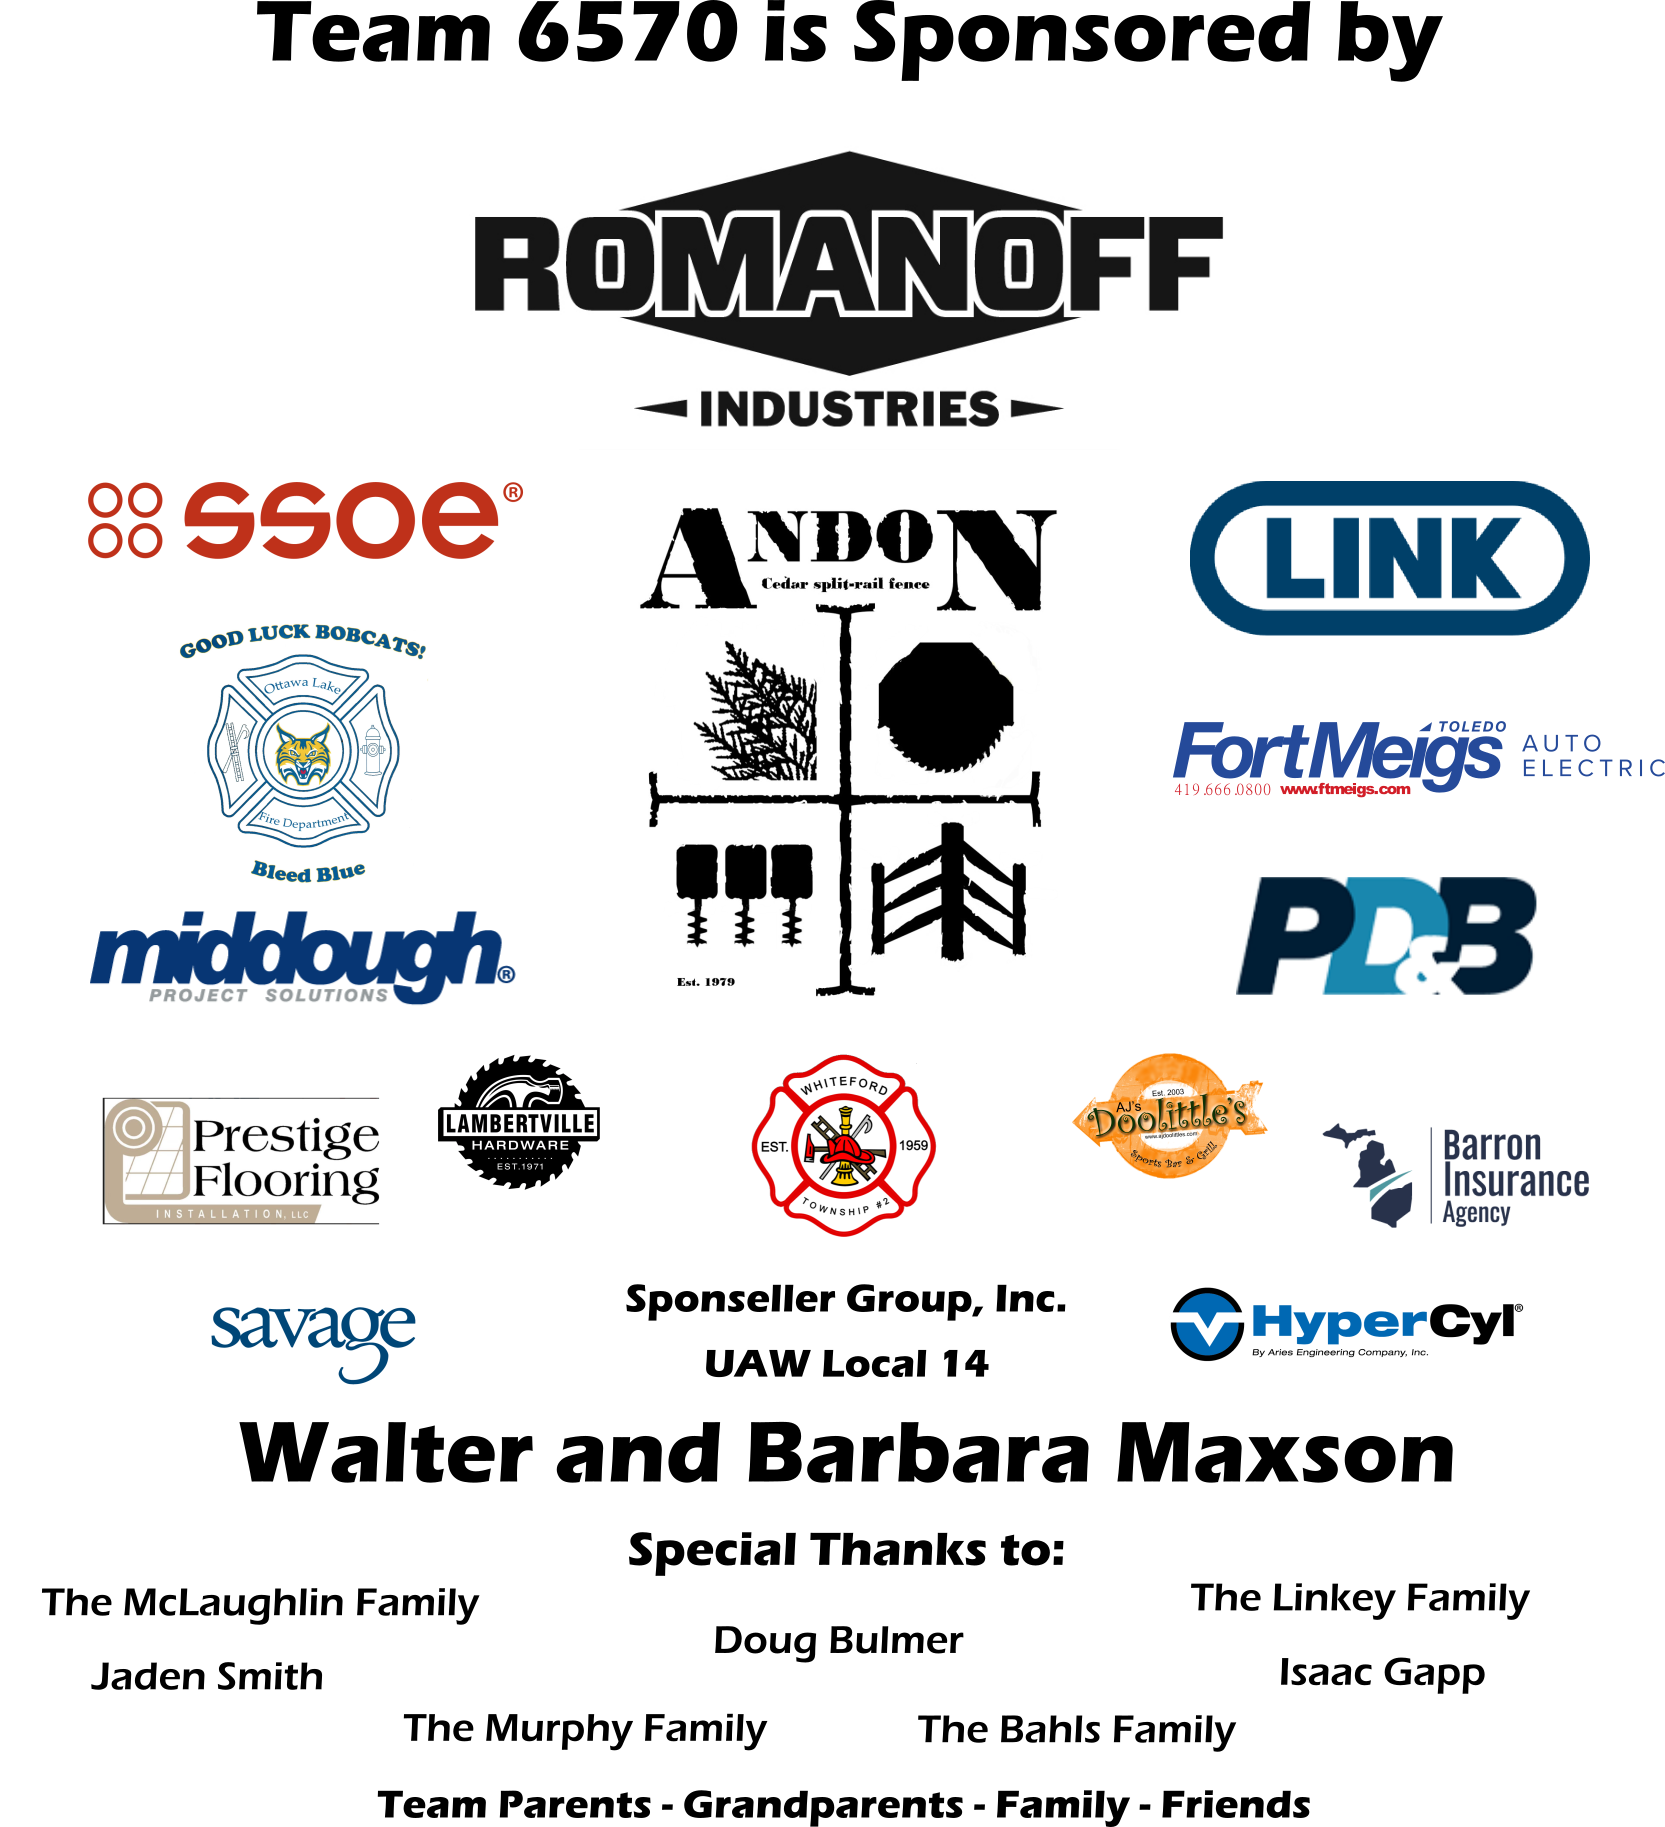 Thanks to our incredible sponsors!